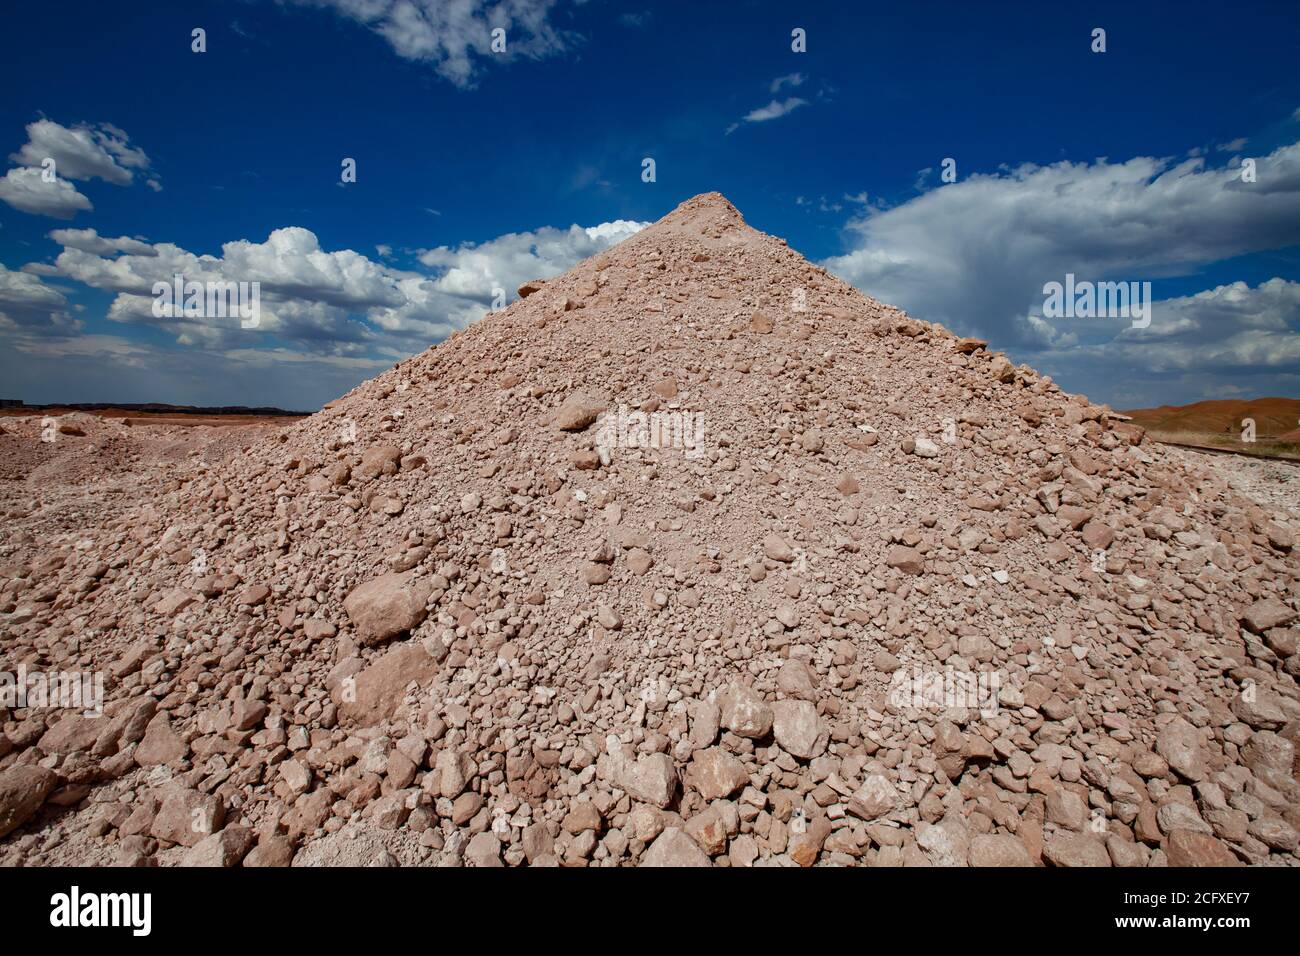 Pyramid heap of minerals. Aluminium ore mining. Bauxite clay quarry on blue sky with clouds. Stock Photo